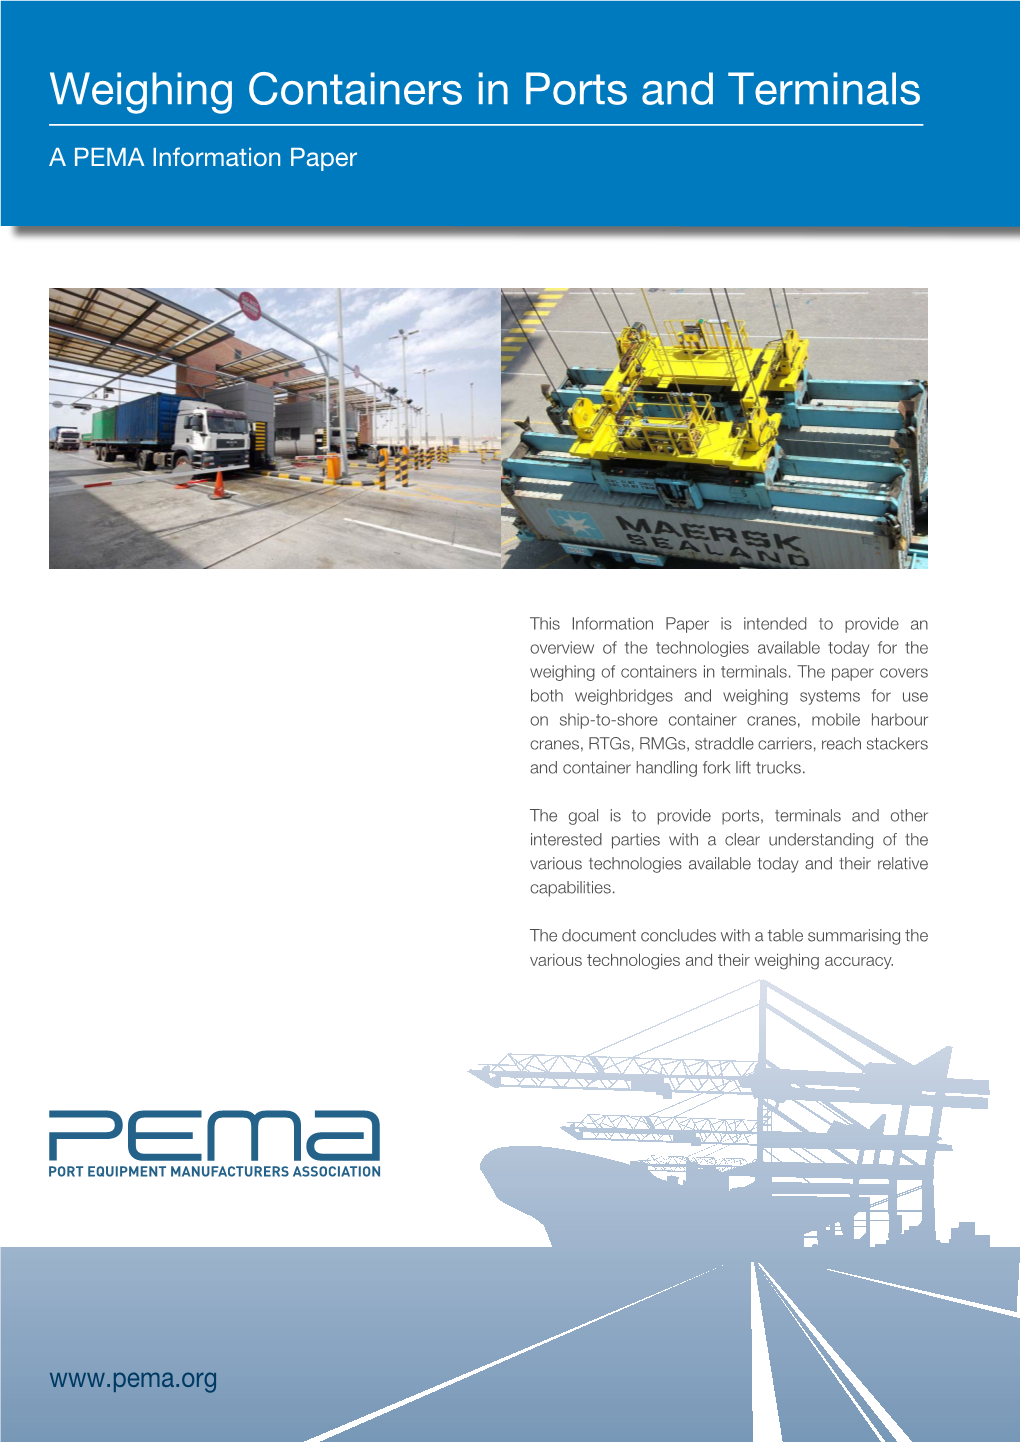 Weighing Containers in Ports and Terminals